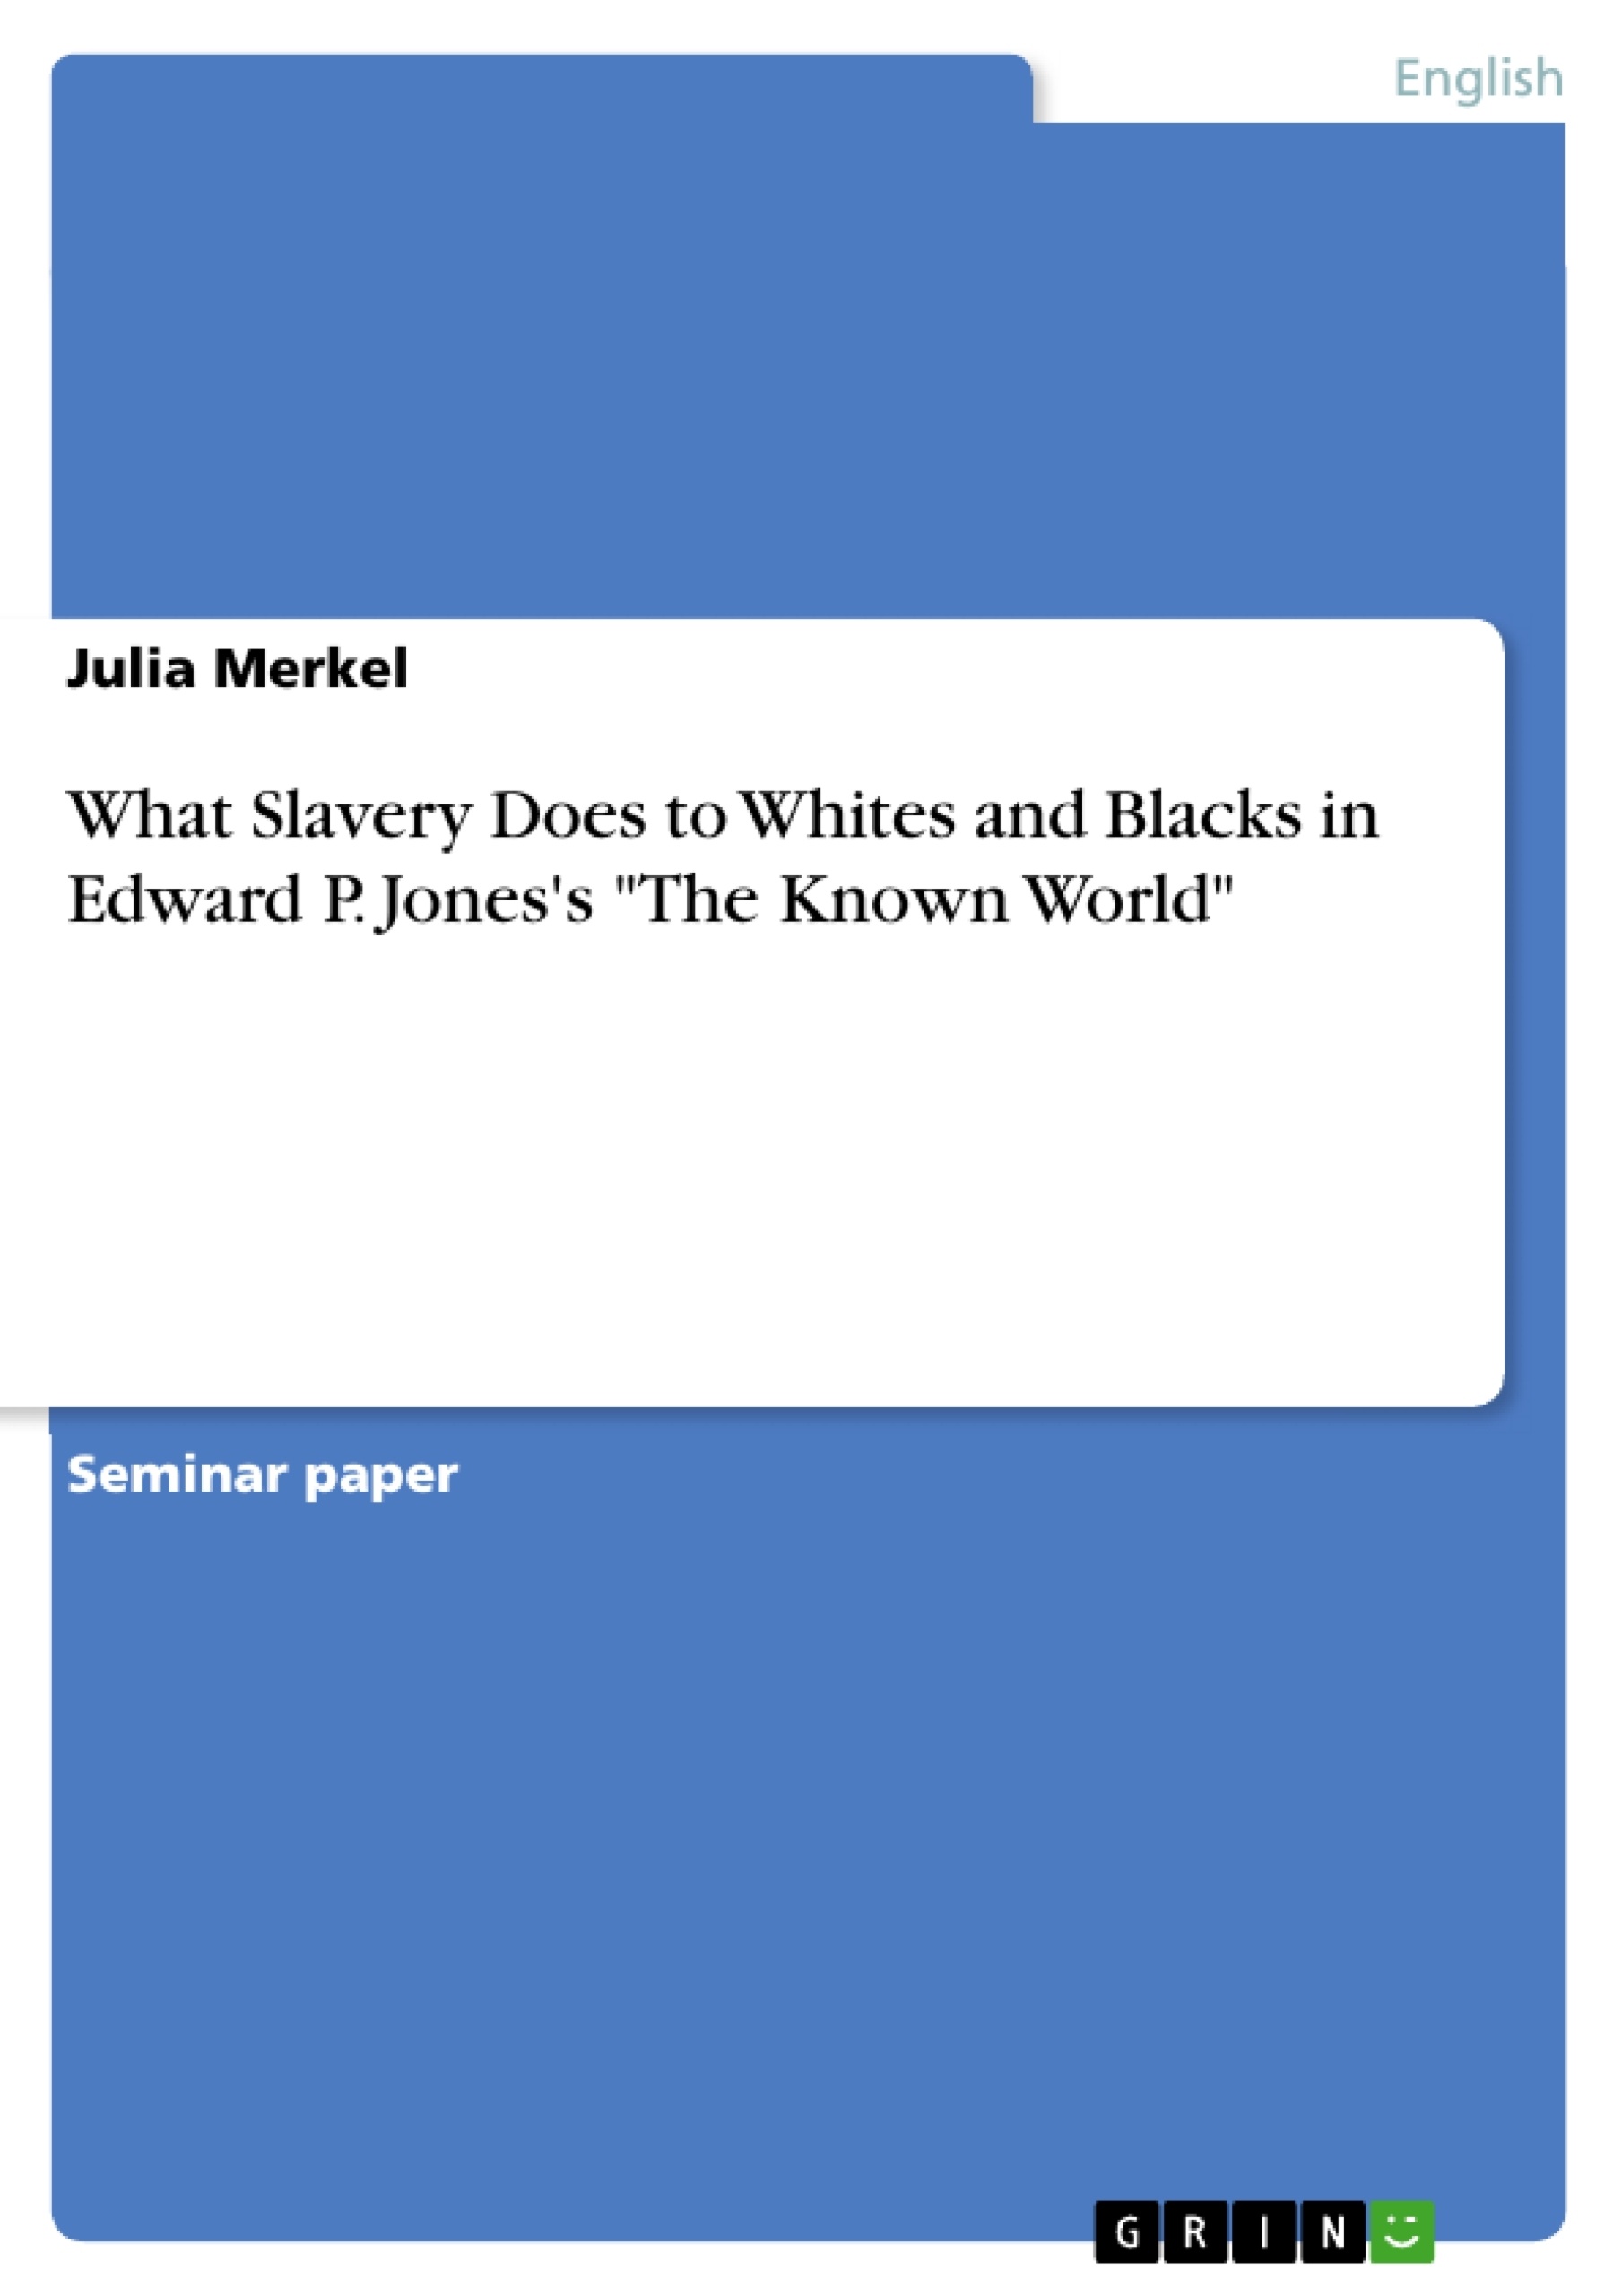 Title: What Slavery Does to Whites and Blacks in Edward P. Jones's "The Known World"